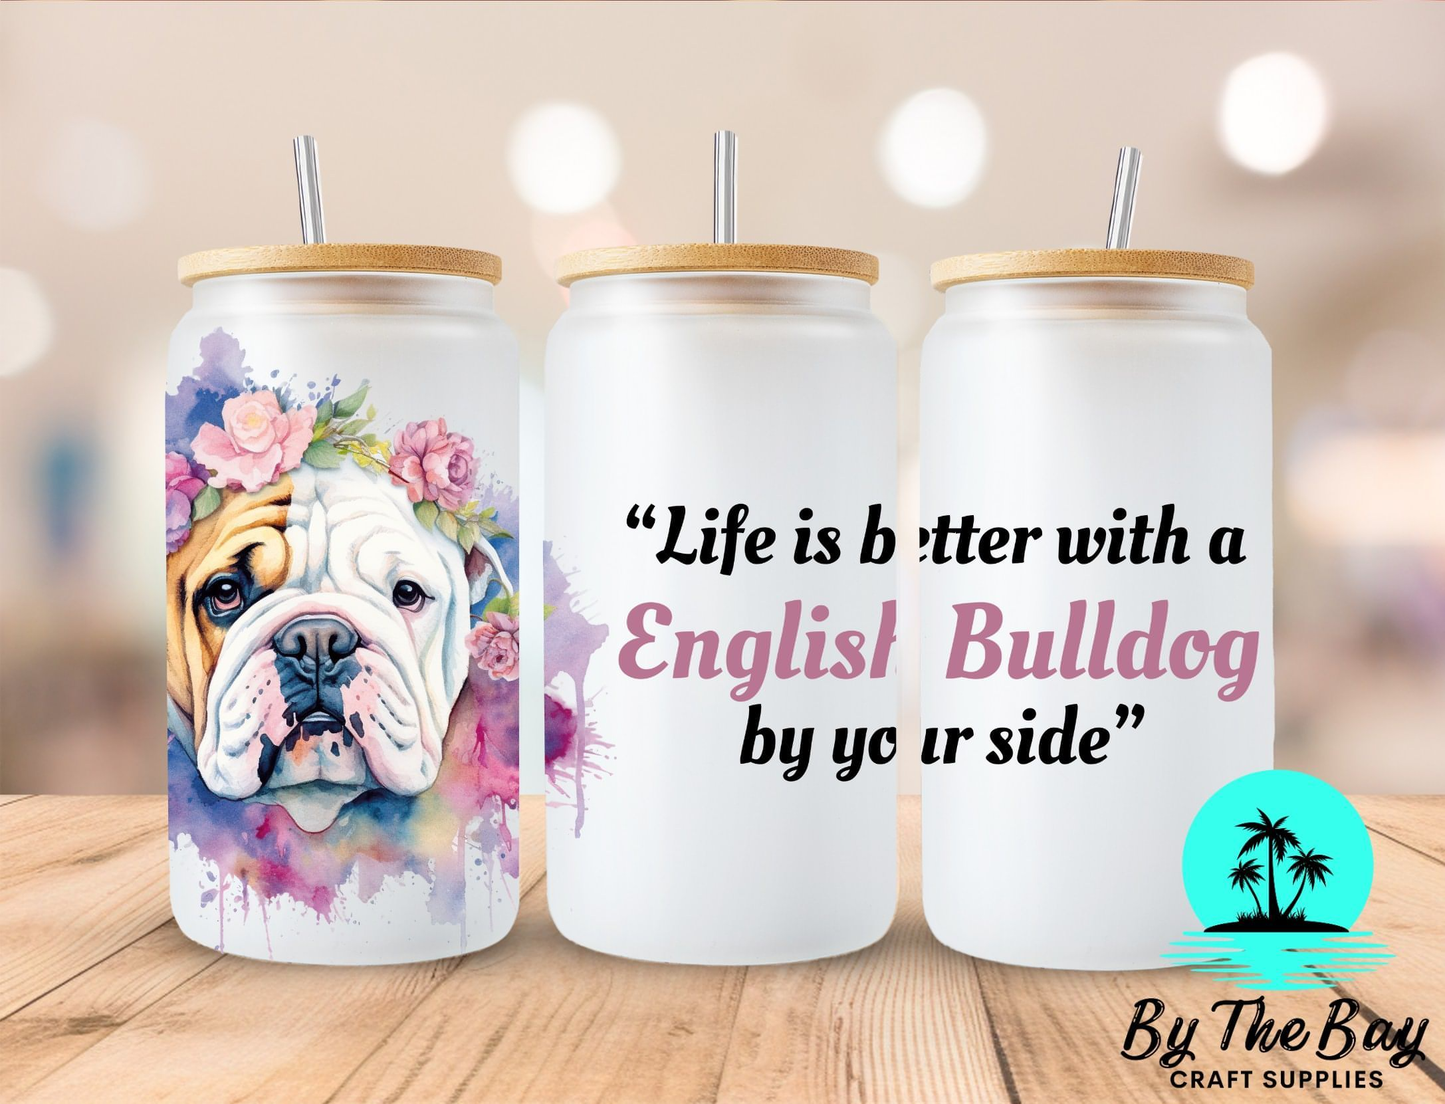 English Bulldog by your side